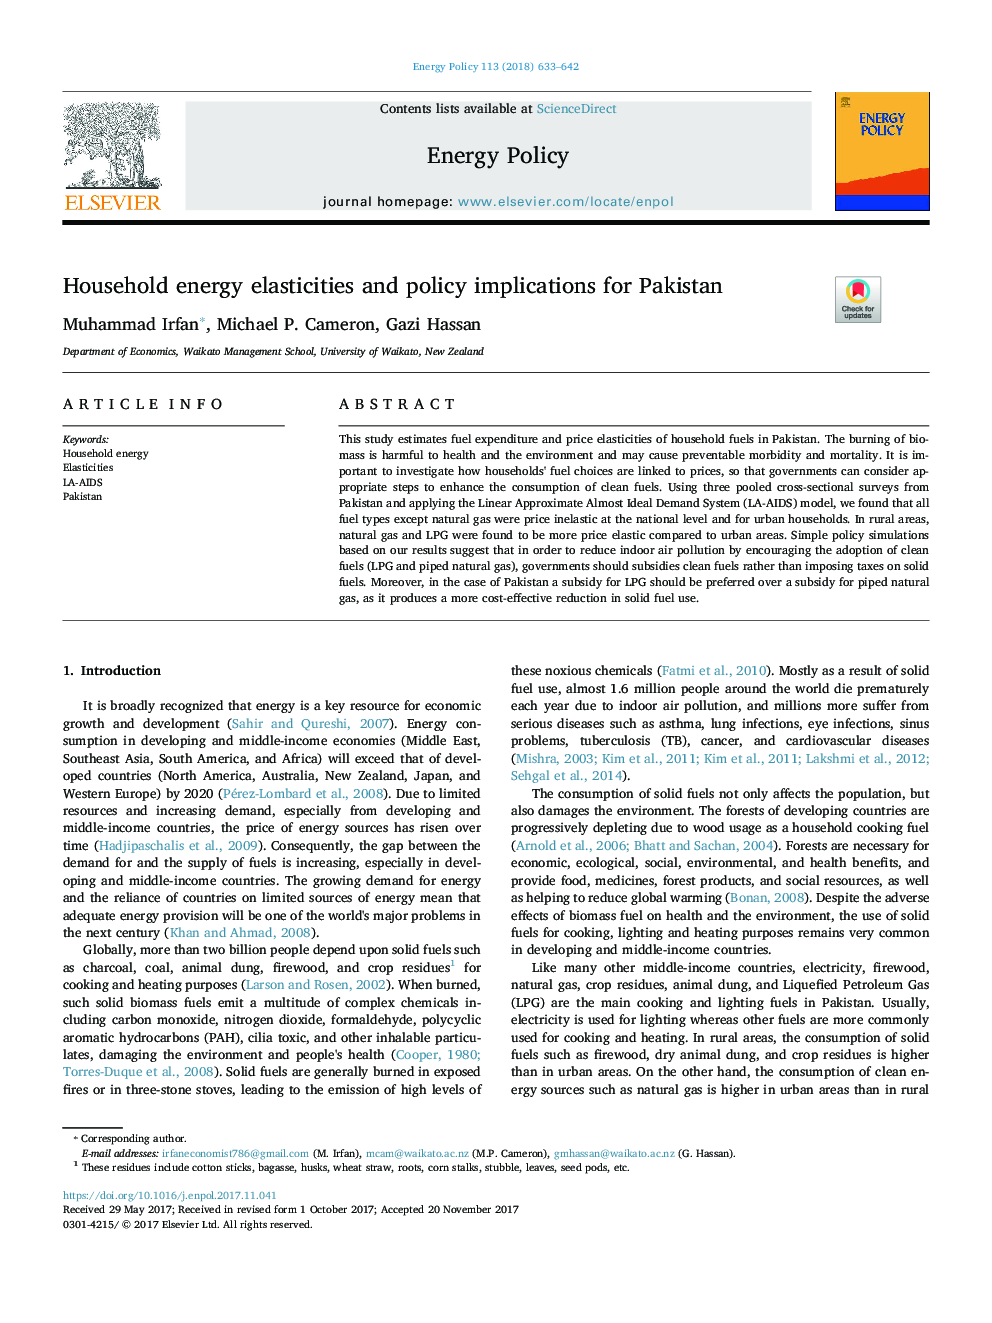 Household energy elasticities and policy implications for Pakistan